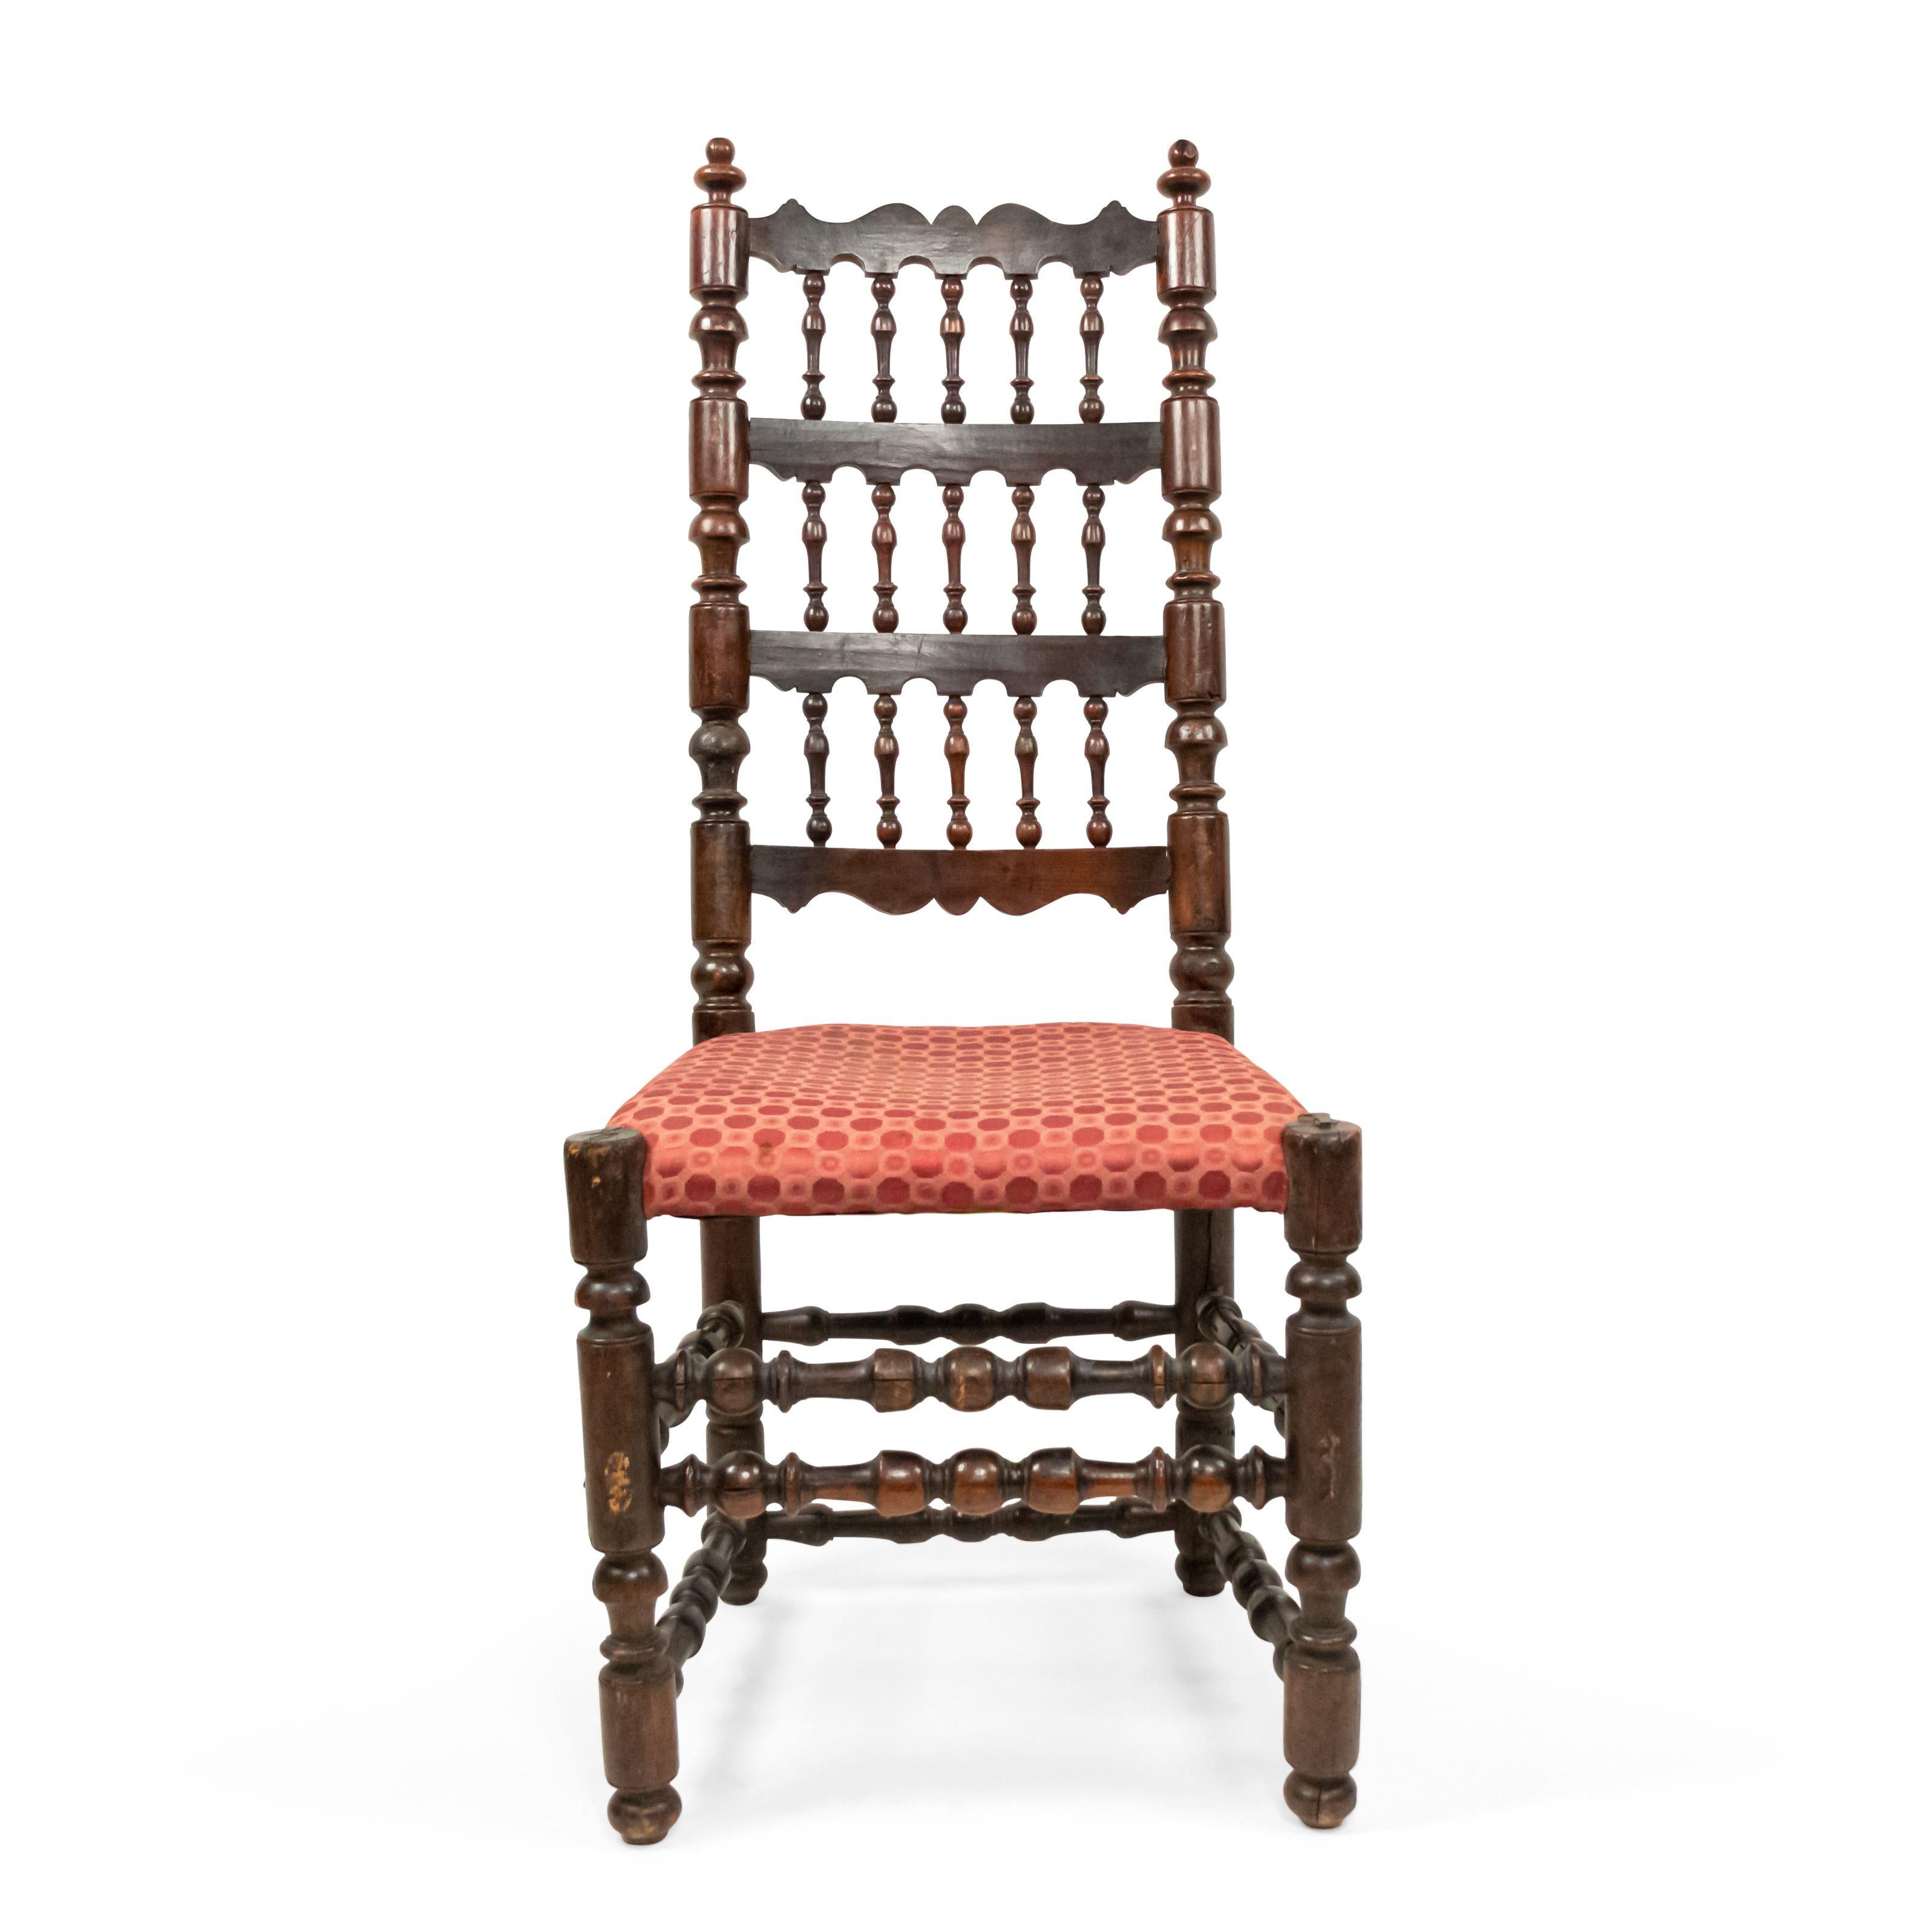 3 English Renaissance style (17th Cent) walnut 3 tier spindle back side chairs with upholstered seat. (priced each).
  